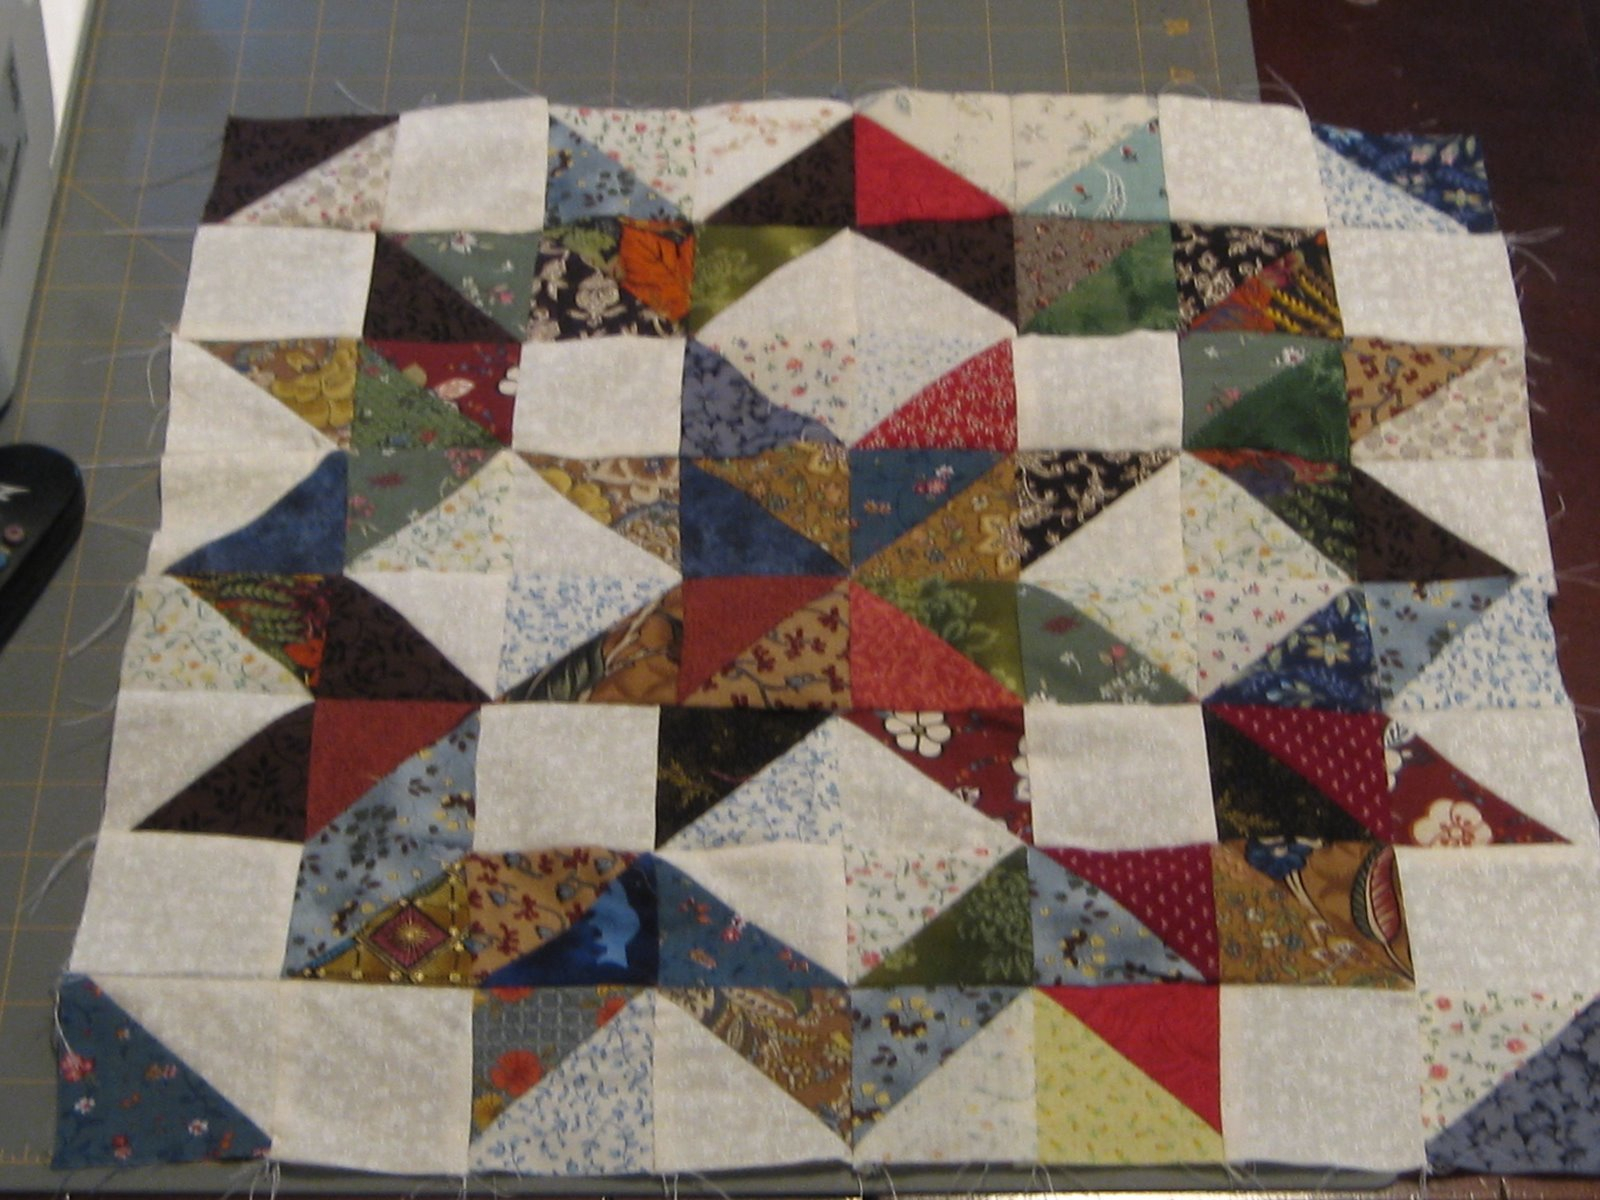 OLD FASHIONED QUILTS MAKING A BUGGY WHEELS QUILT